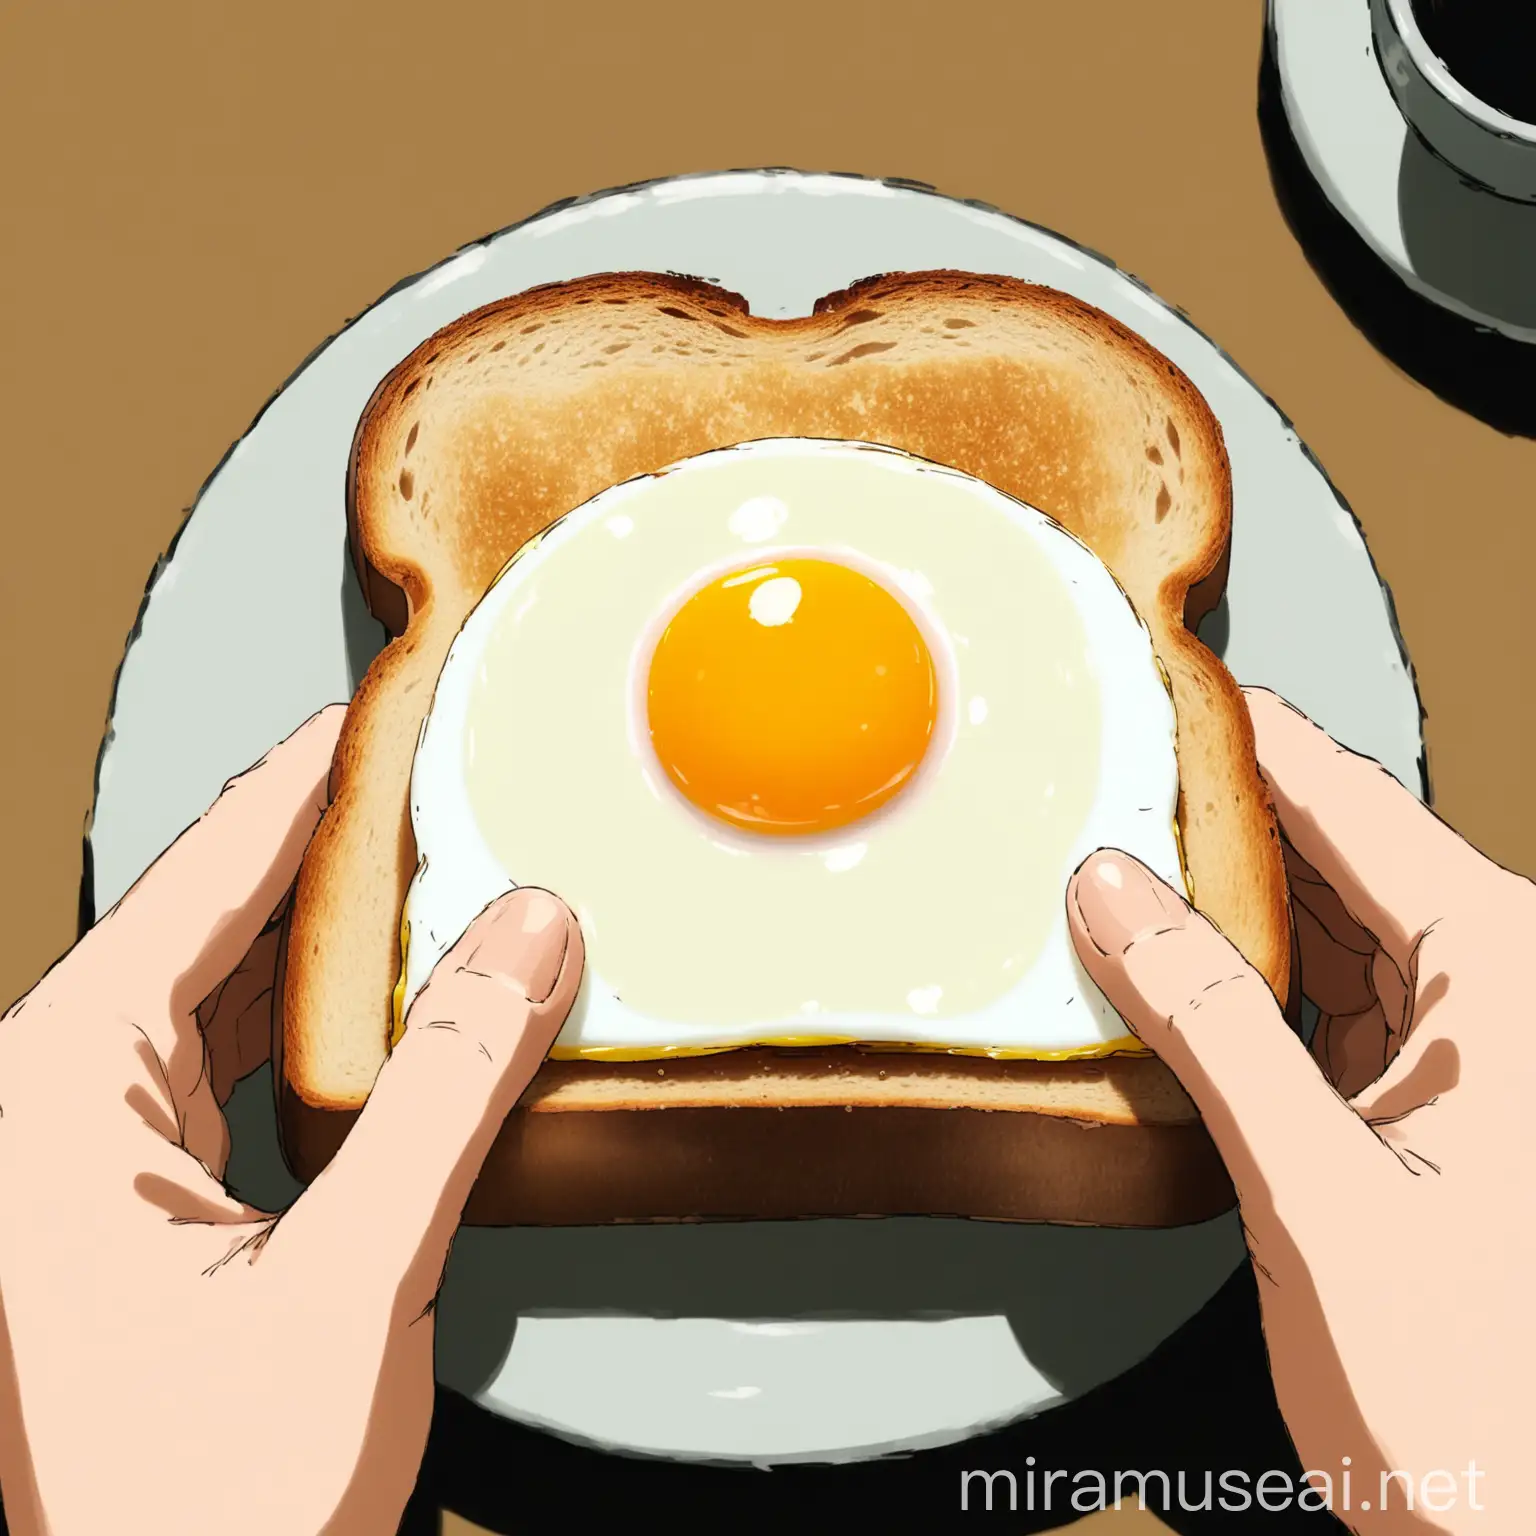  In the style of Ghibli studio, with low saturation, a pair of hands holds a thick slice of toast with a sunny-side-up egg on top.